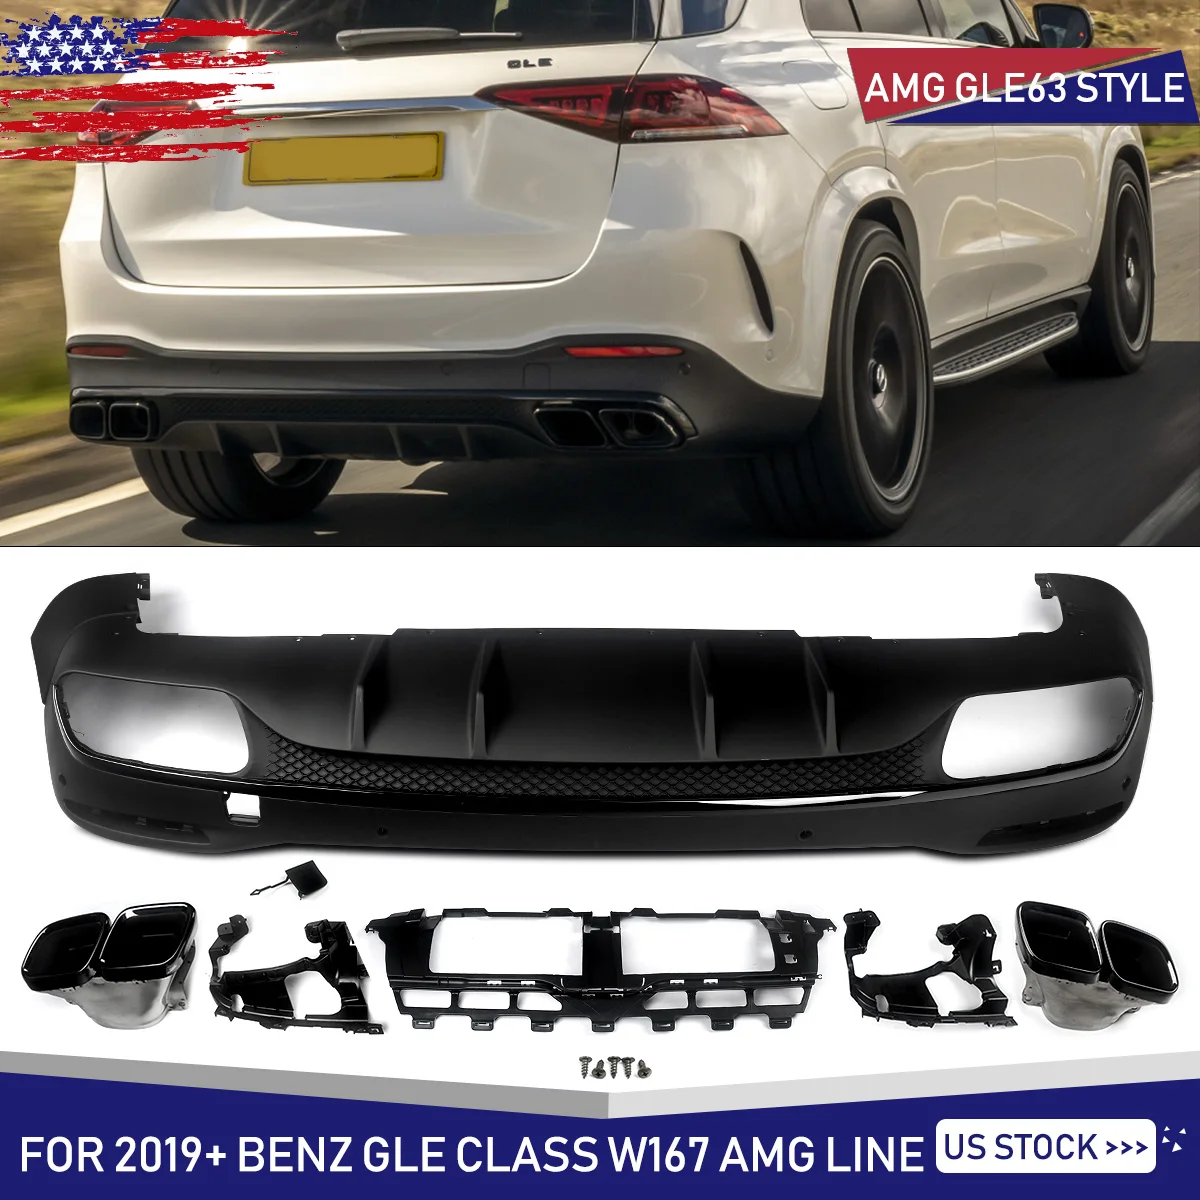 

GLE63/53 Look Rear Bumper Diffuser for Mercedes Benz W167 AMG Style Rear Diffuser+Tailpipes 2020+ Glossly Black